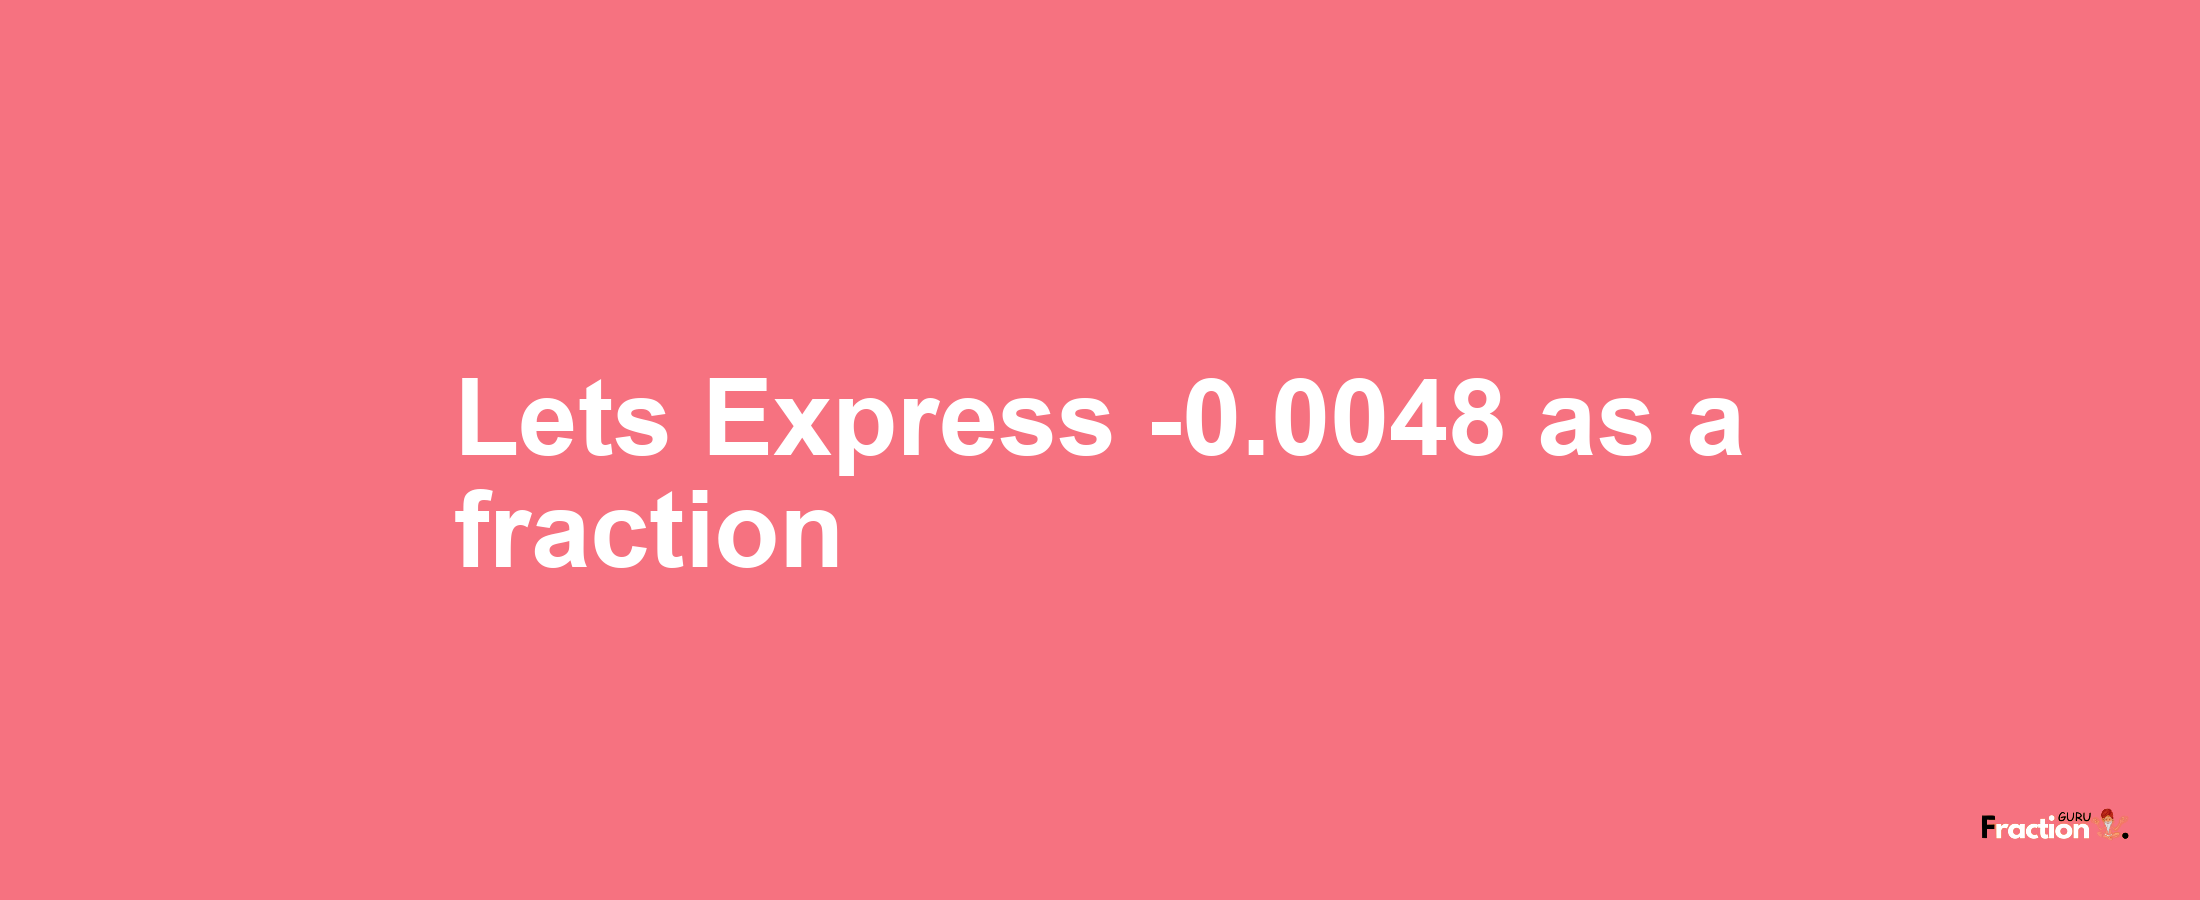 Lets Express -0.0048 as afraction